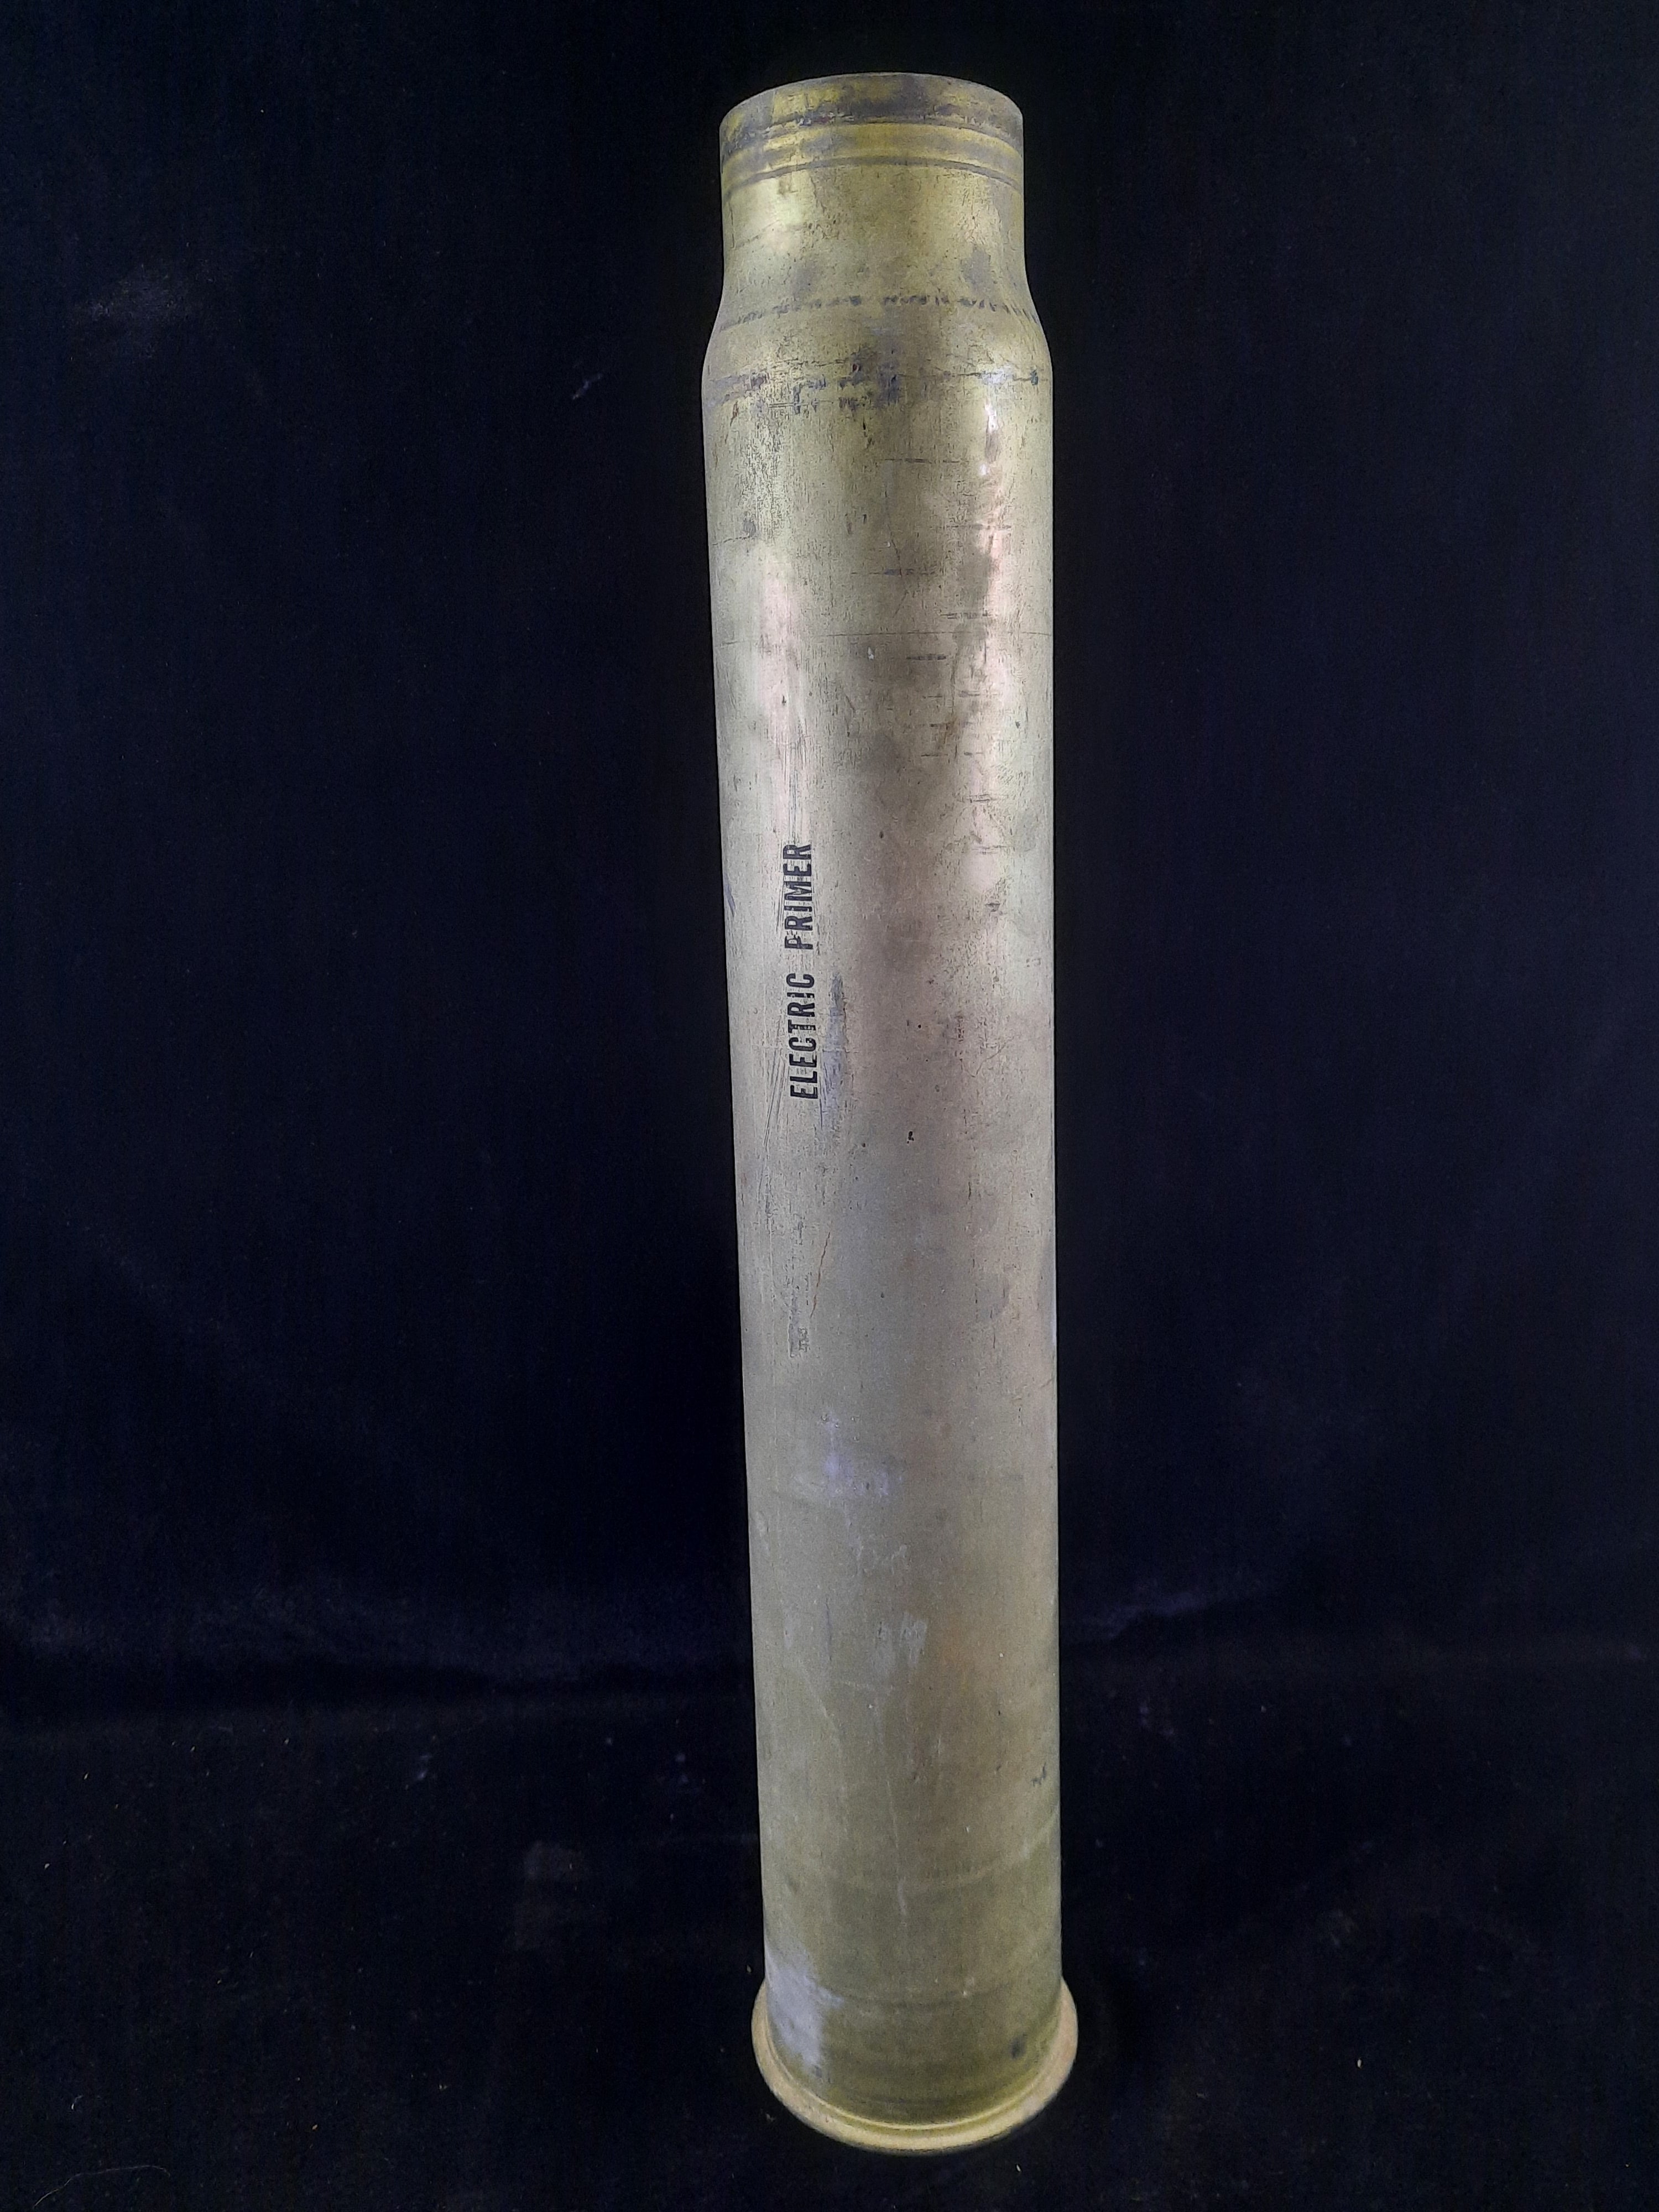 3 inch shell case for M1902 Cannon